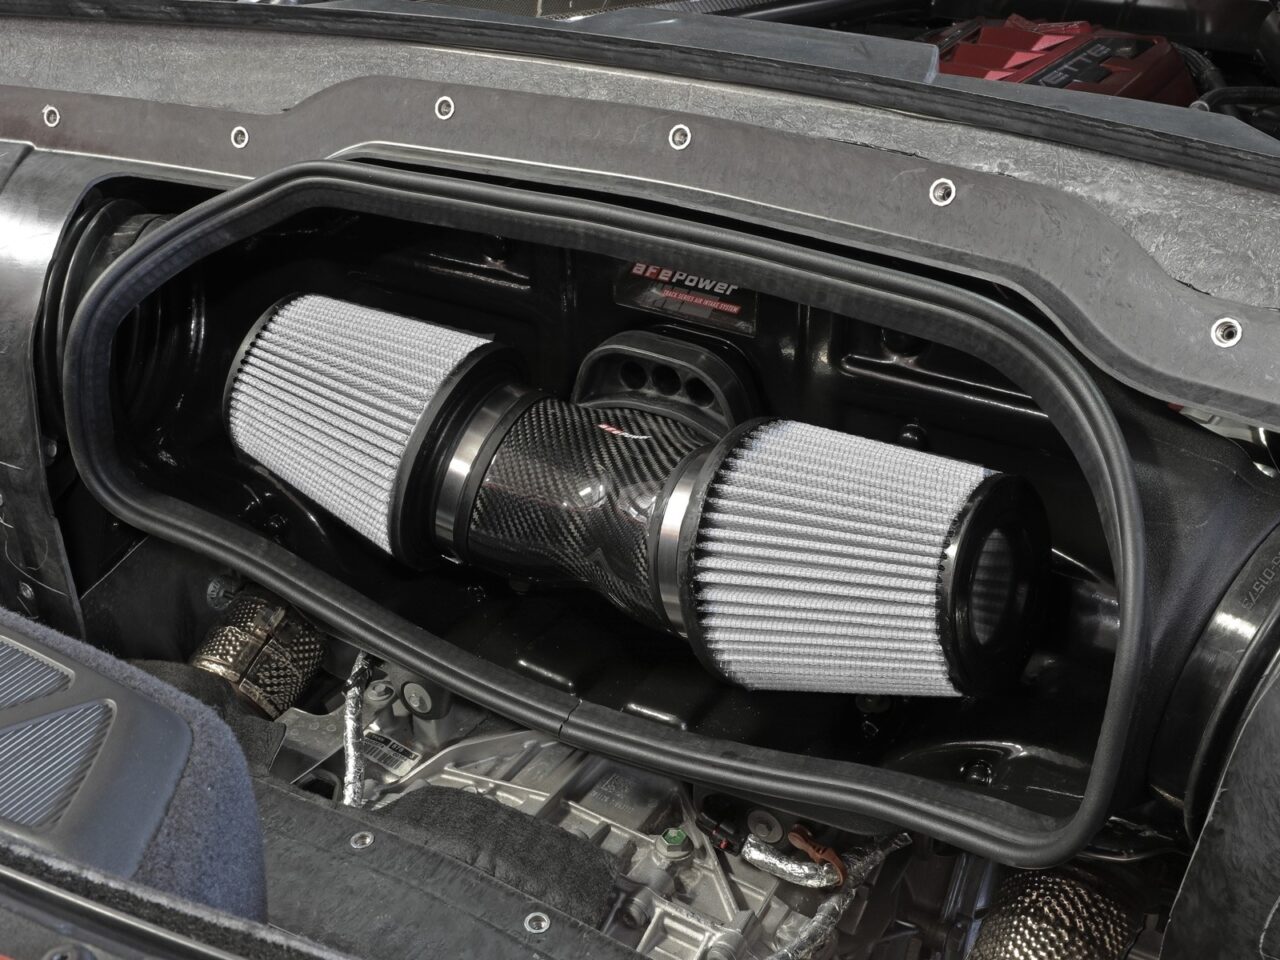 aFe intake kit with two grey dry air filters installed on a 2021 Chevy Corvette C8 engine